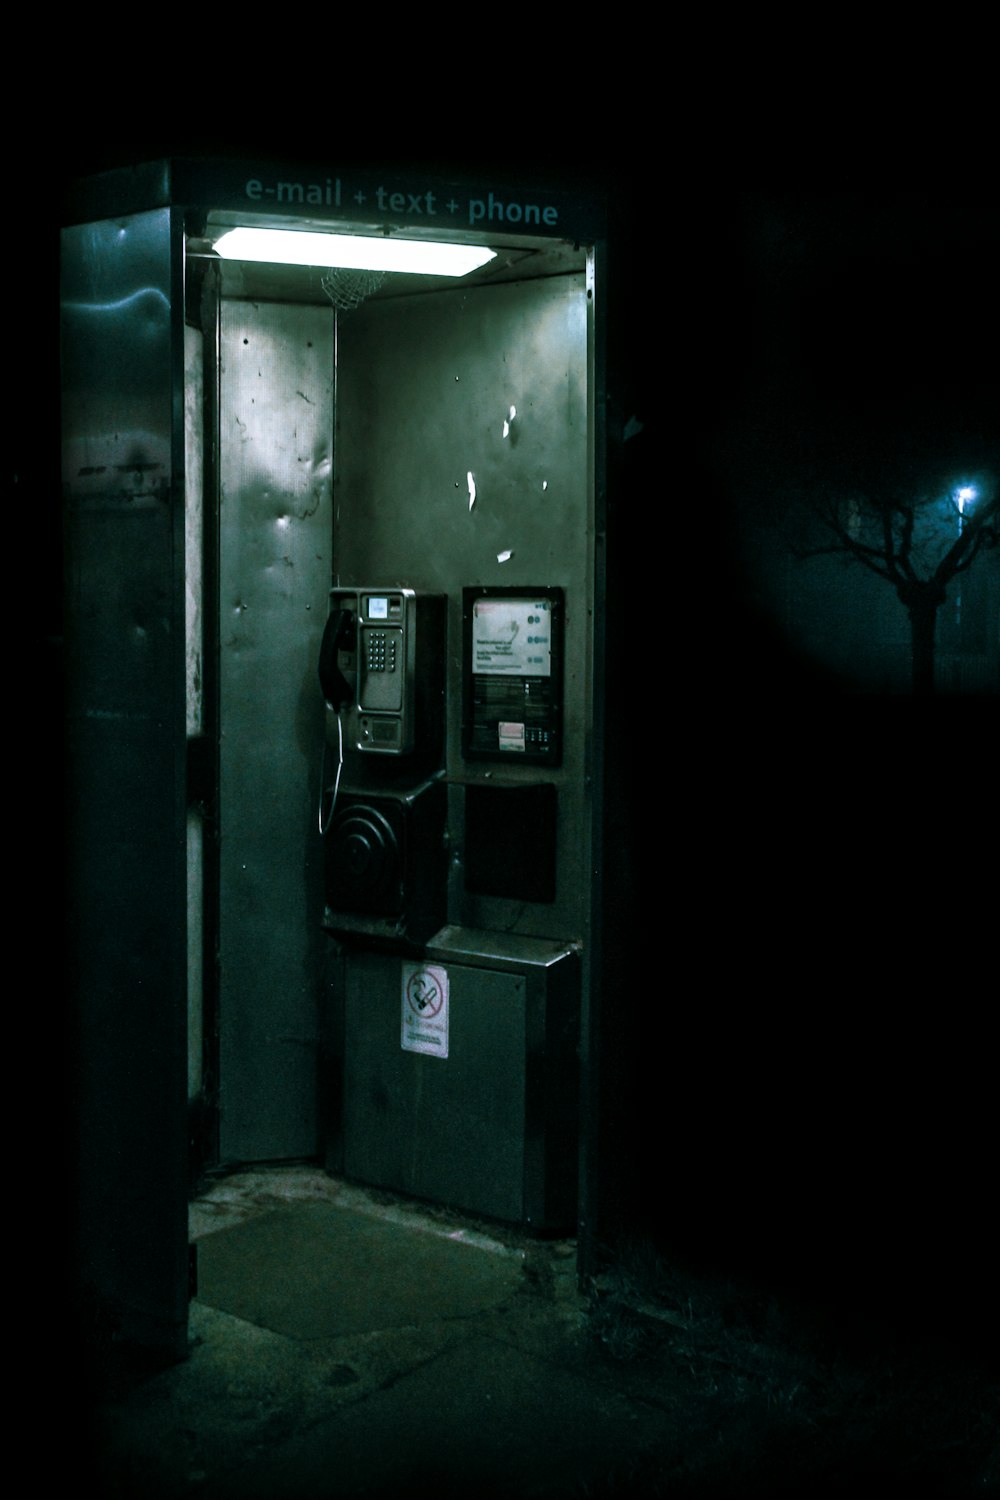 green and black telephone booth